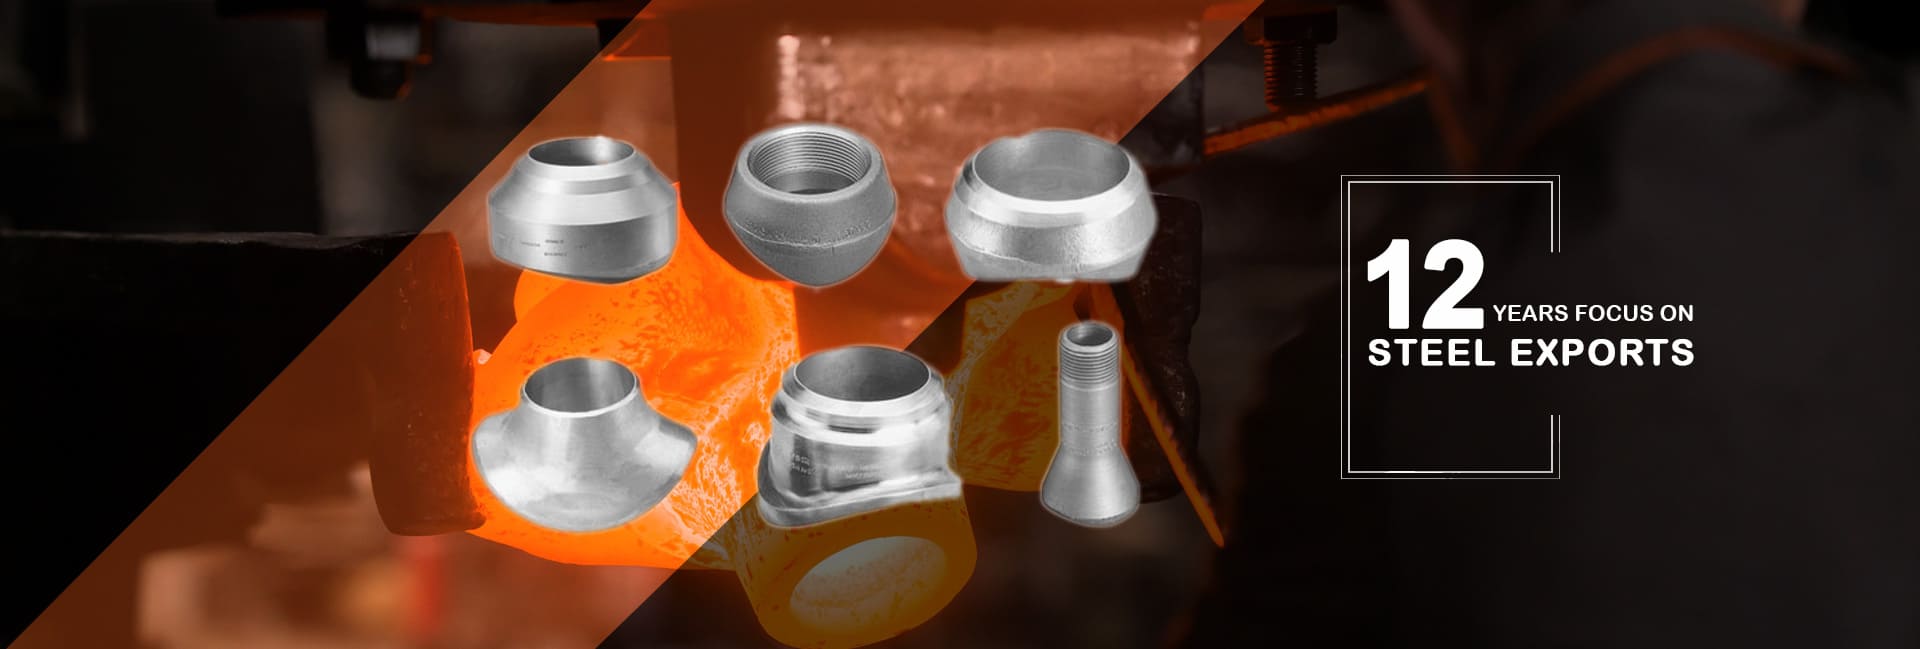 Inconel 718 Outlet Fittings